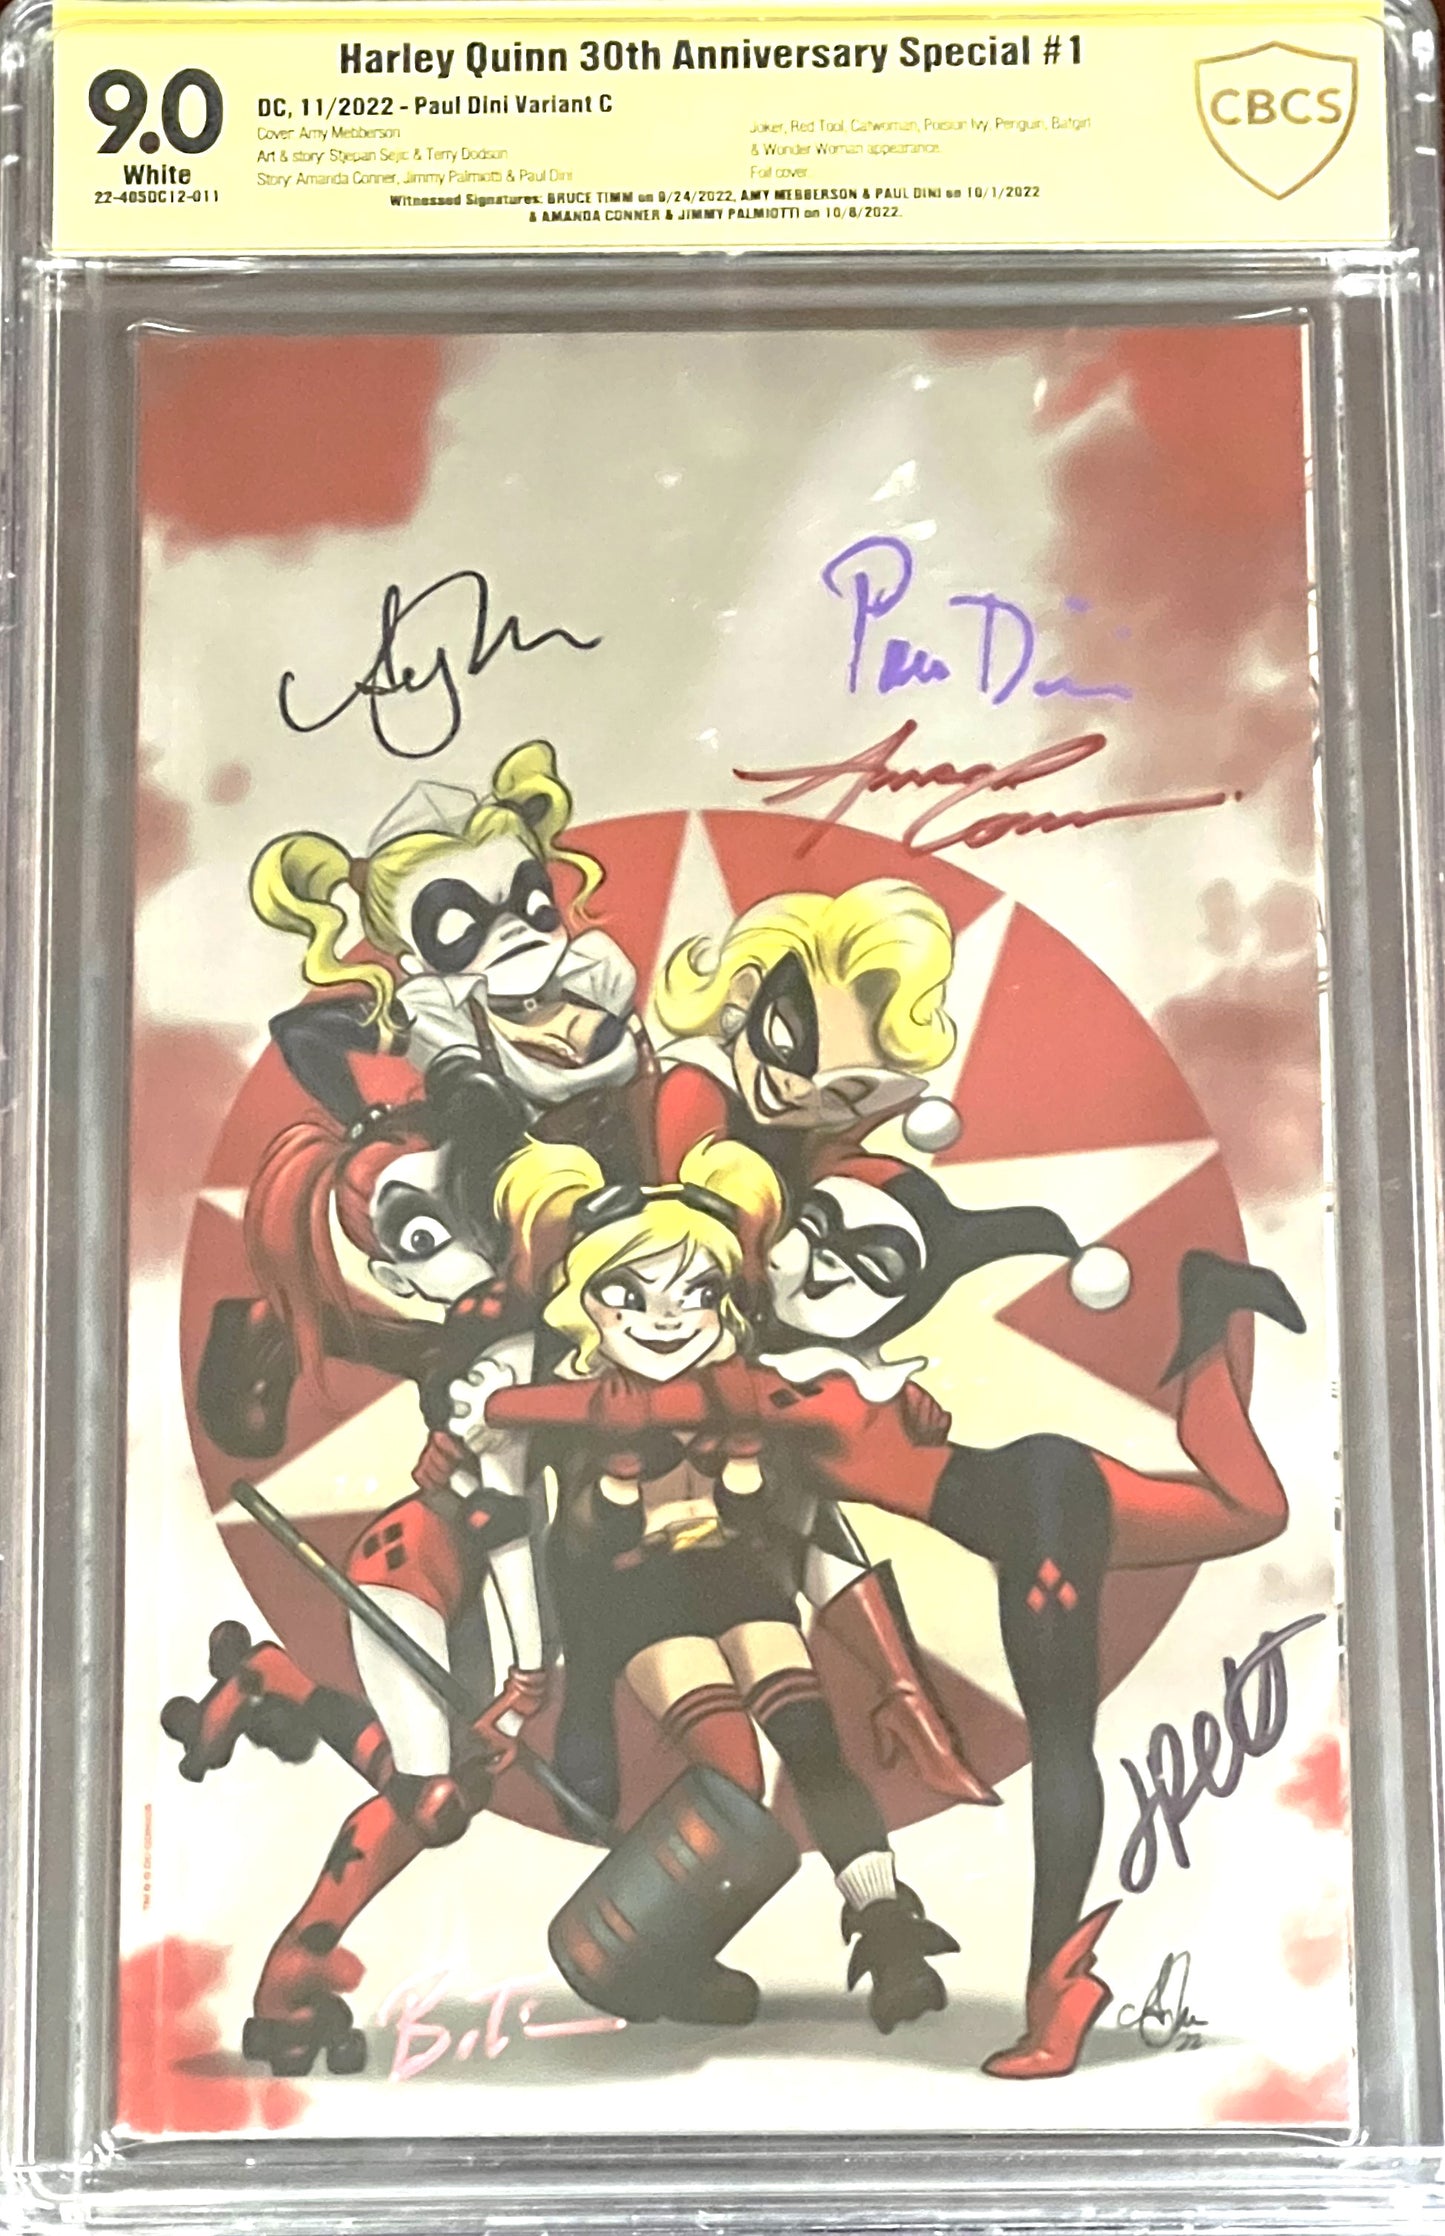 Harley Quinn 30th Anniversary Special #1. CBCS 9.0. Multi-signed.